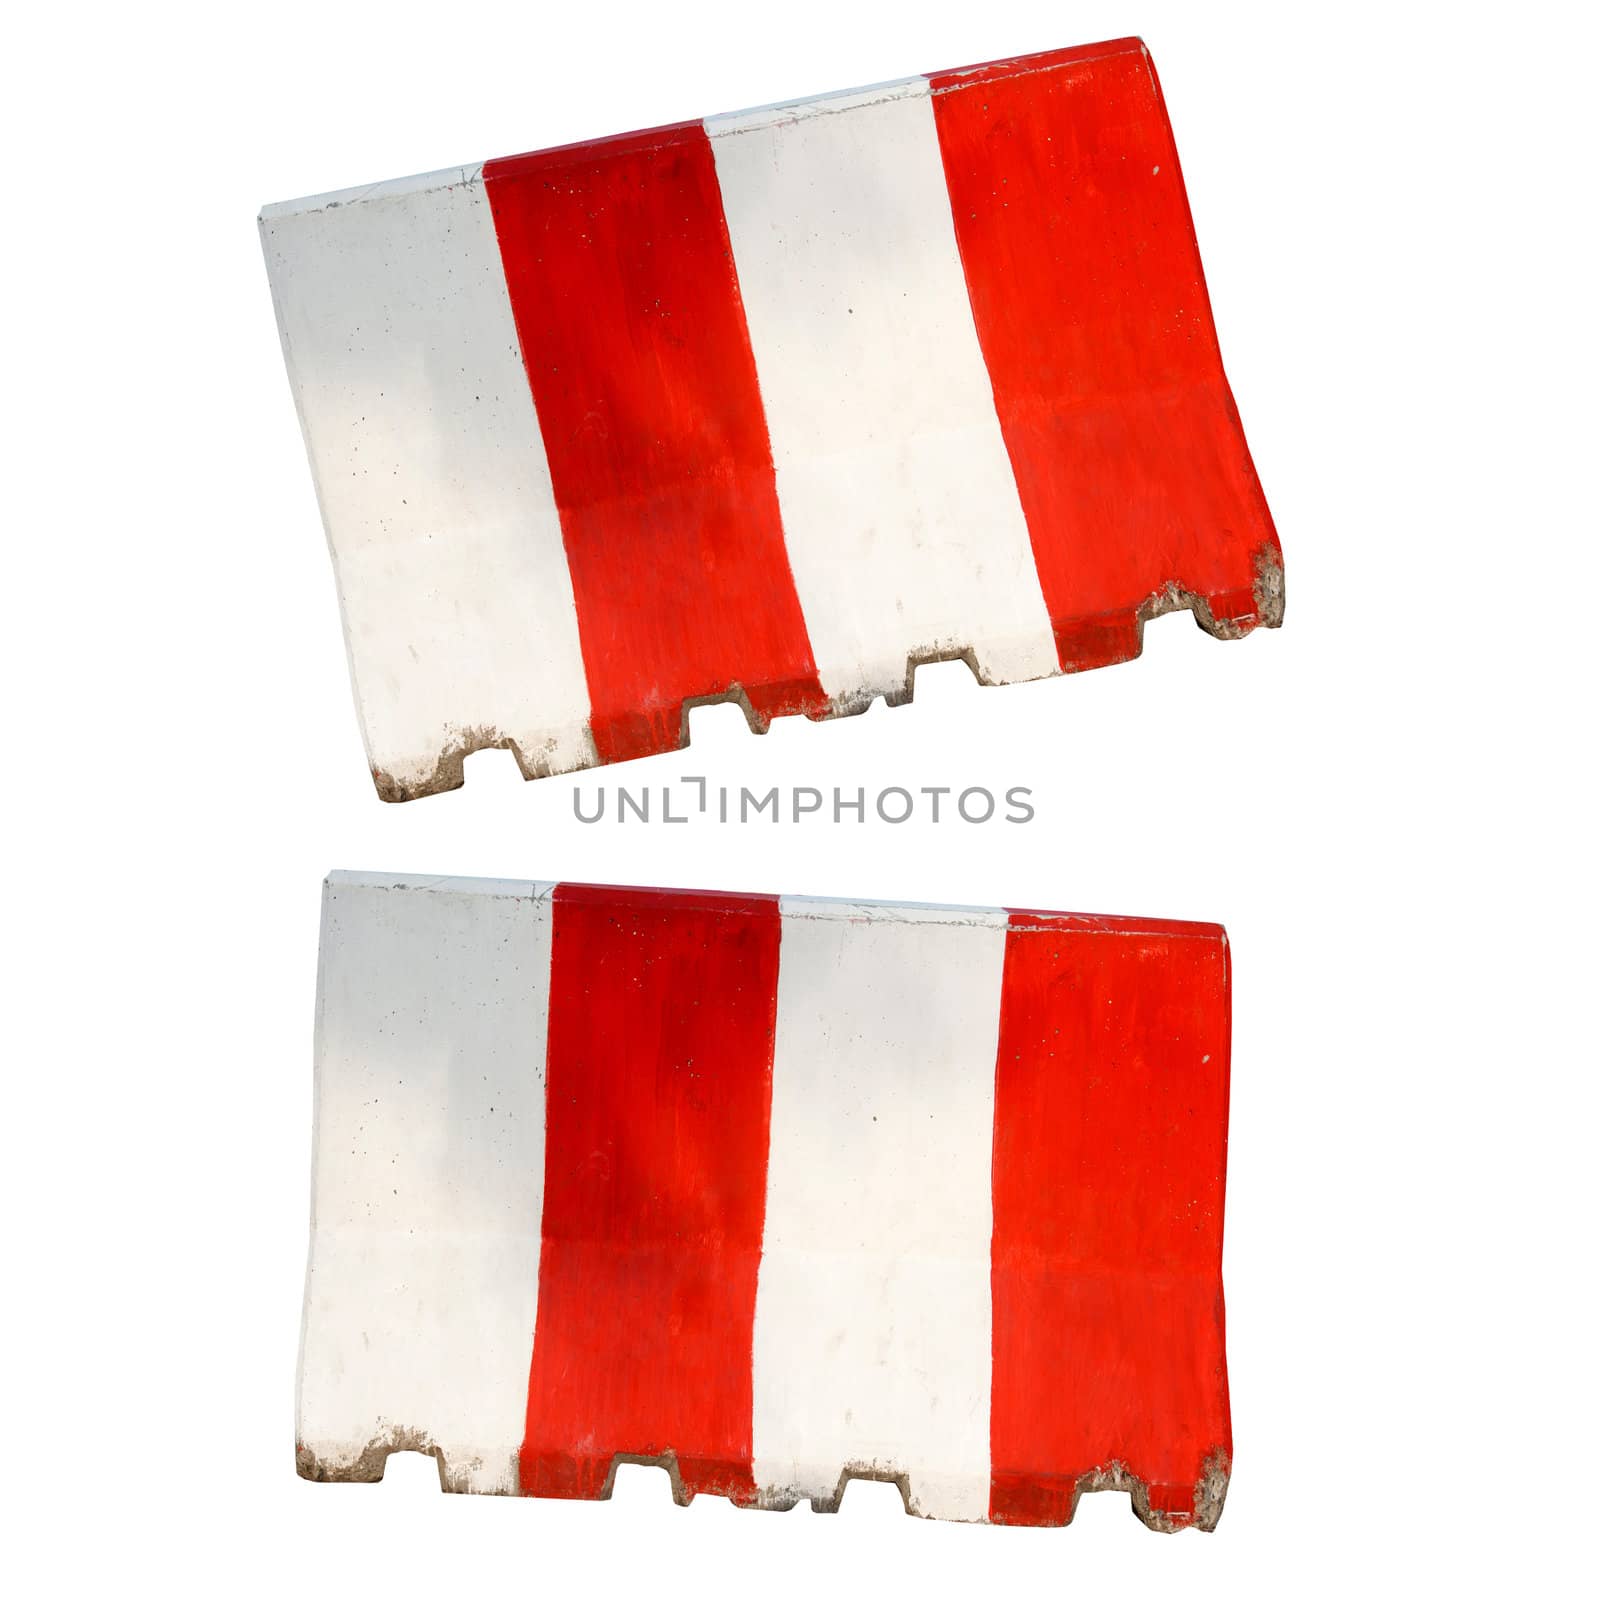 The twin red and white concrete barriers